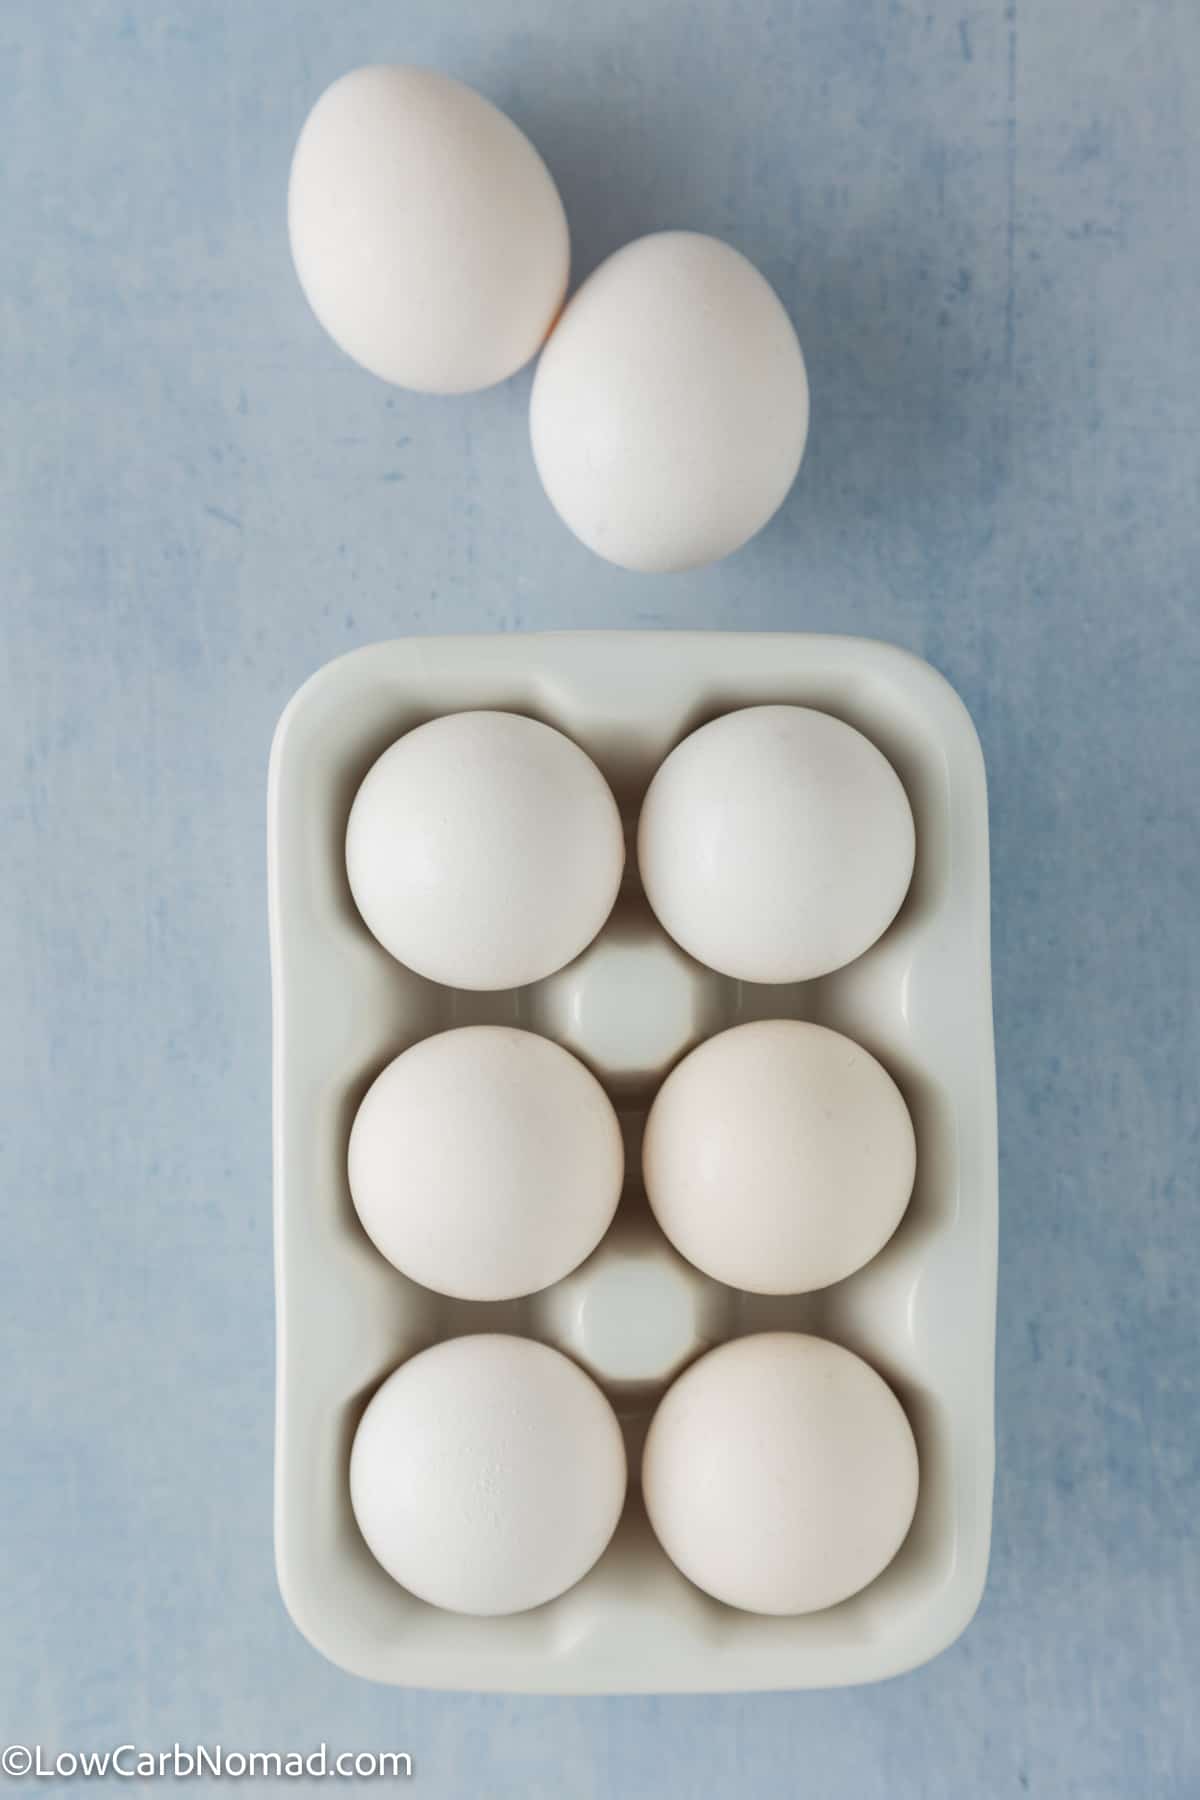 eggs in a container